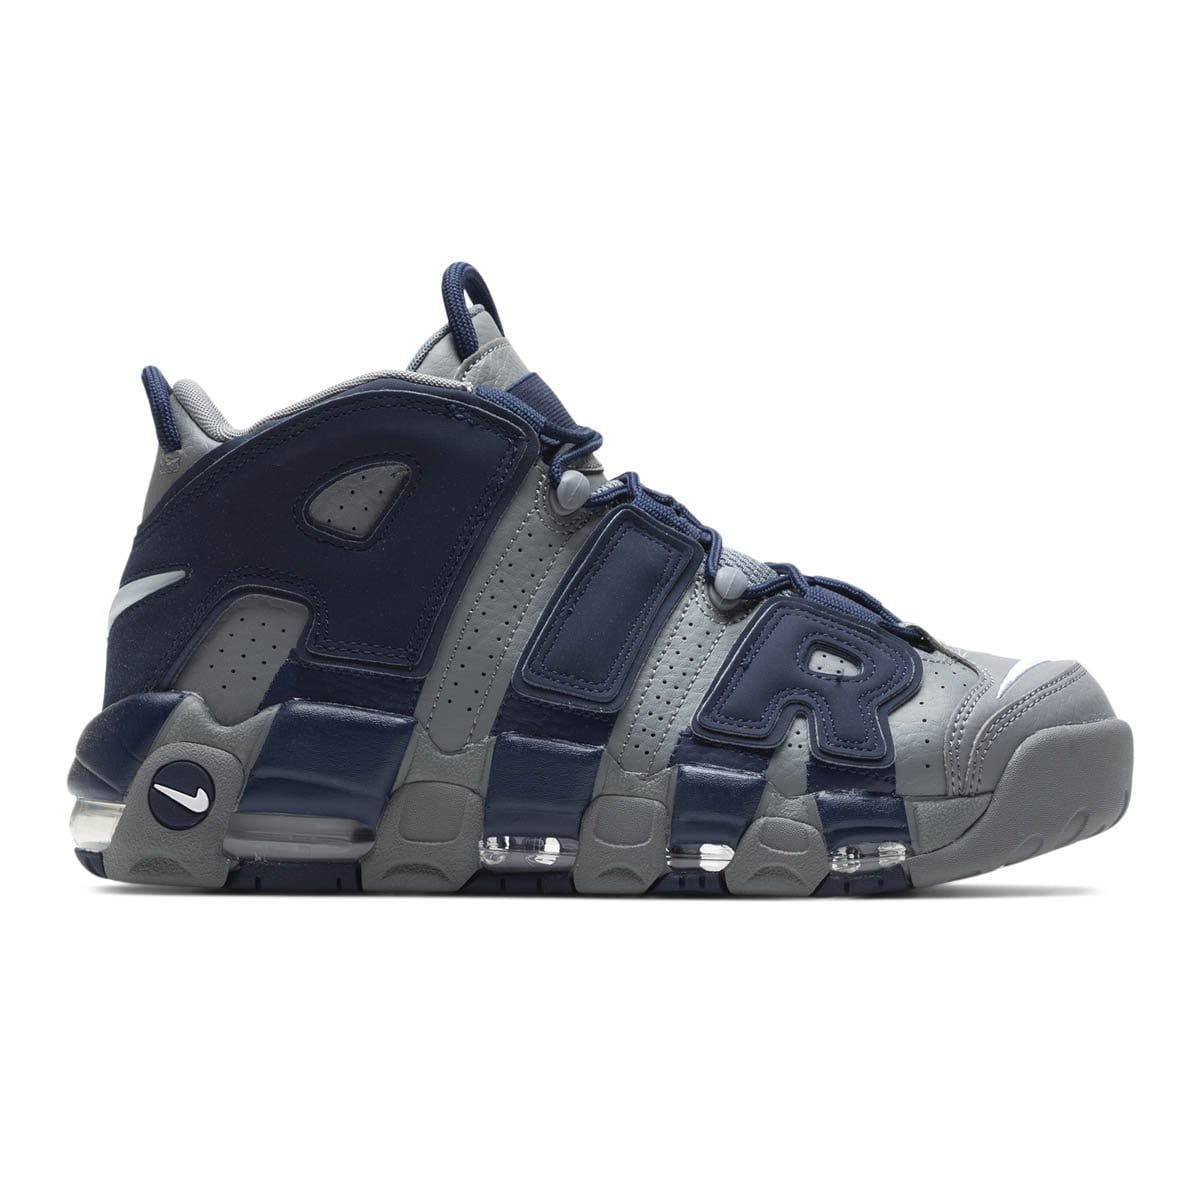 Nike Athletic AIR MORE UPTEMPO '96 COOL